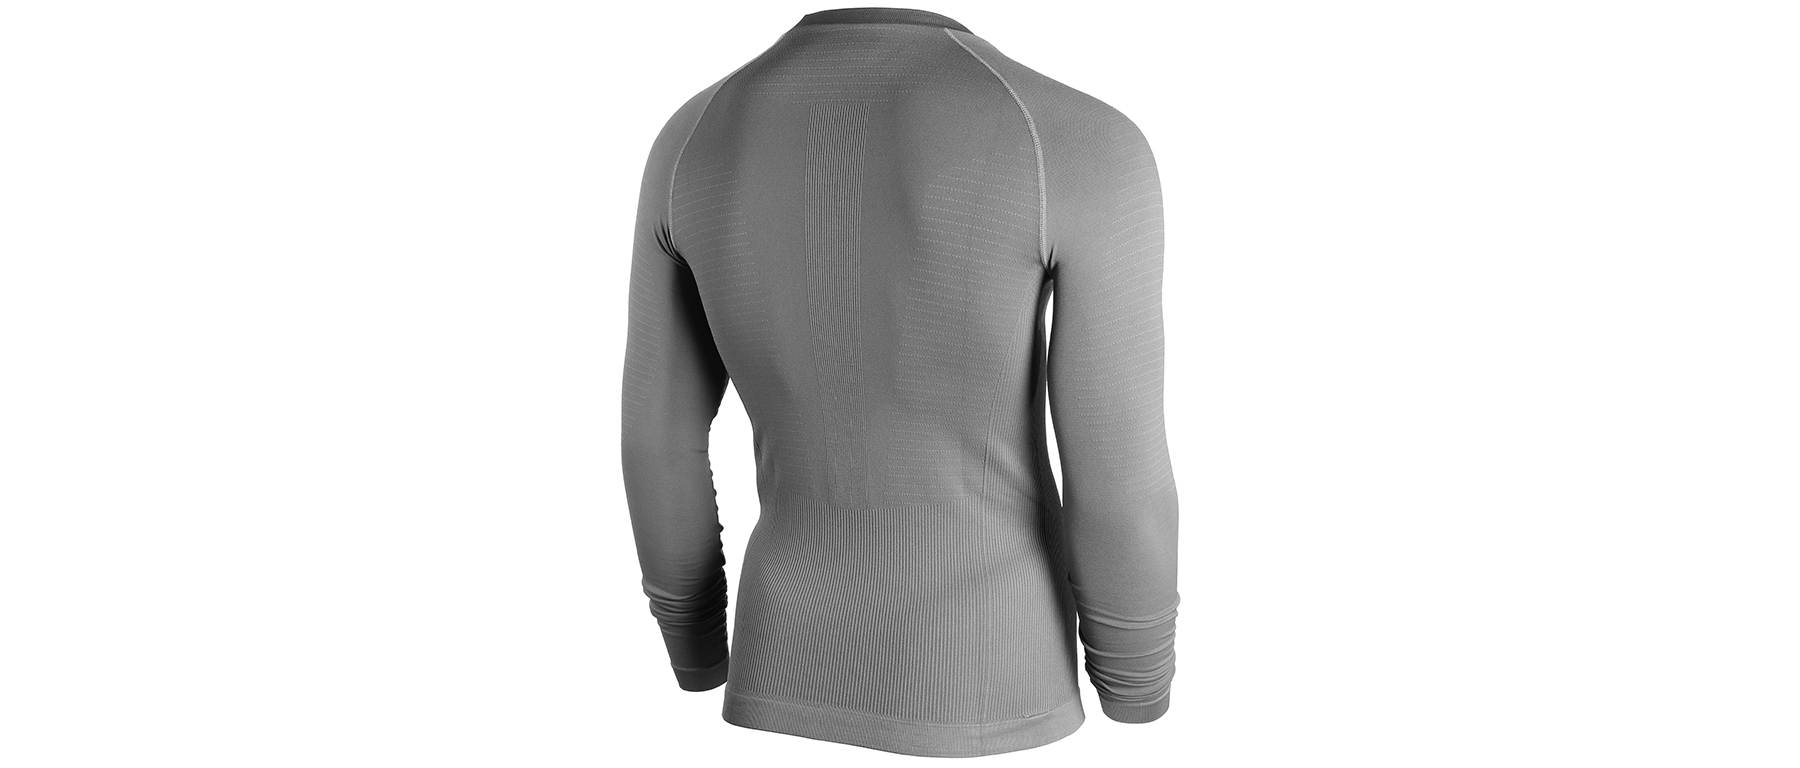 Specialized Seamless LS Base Layer